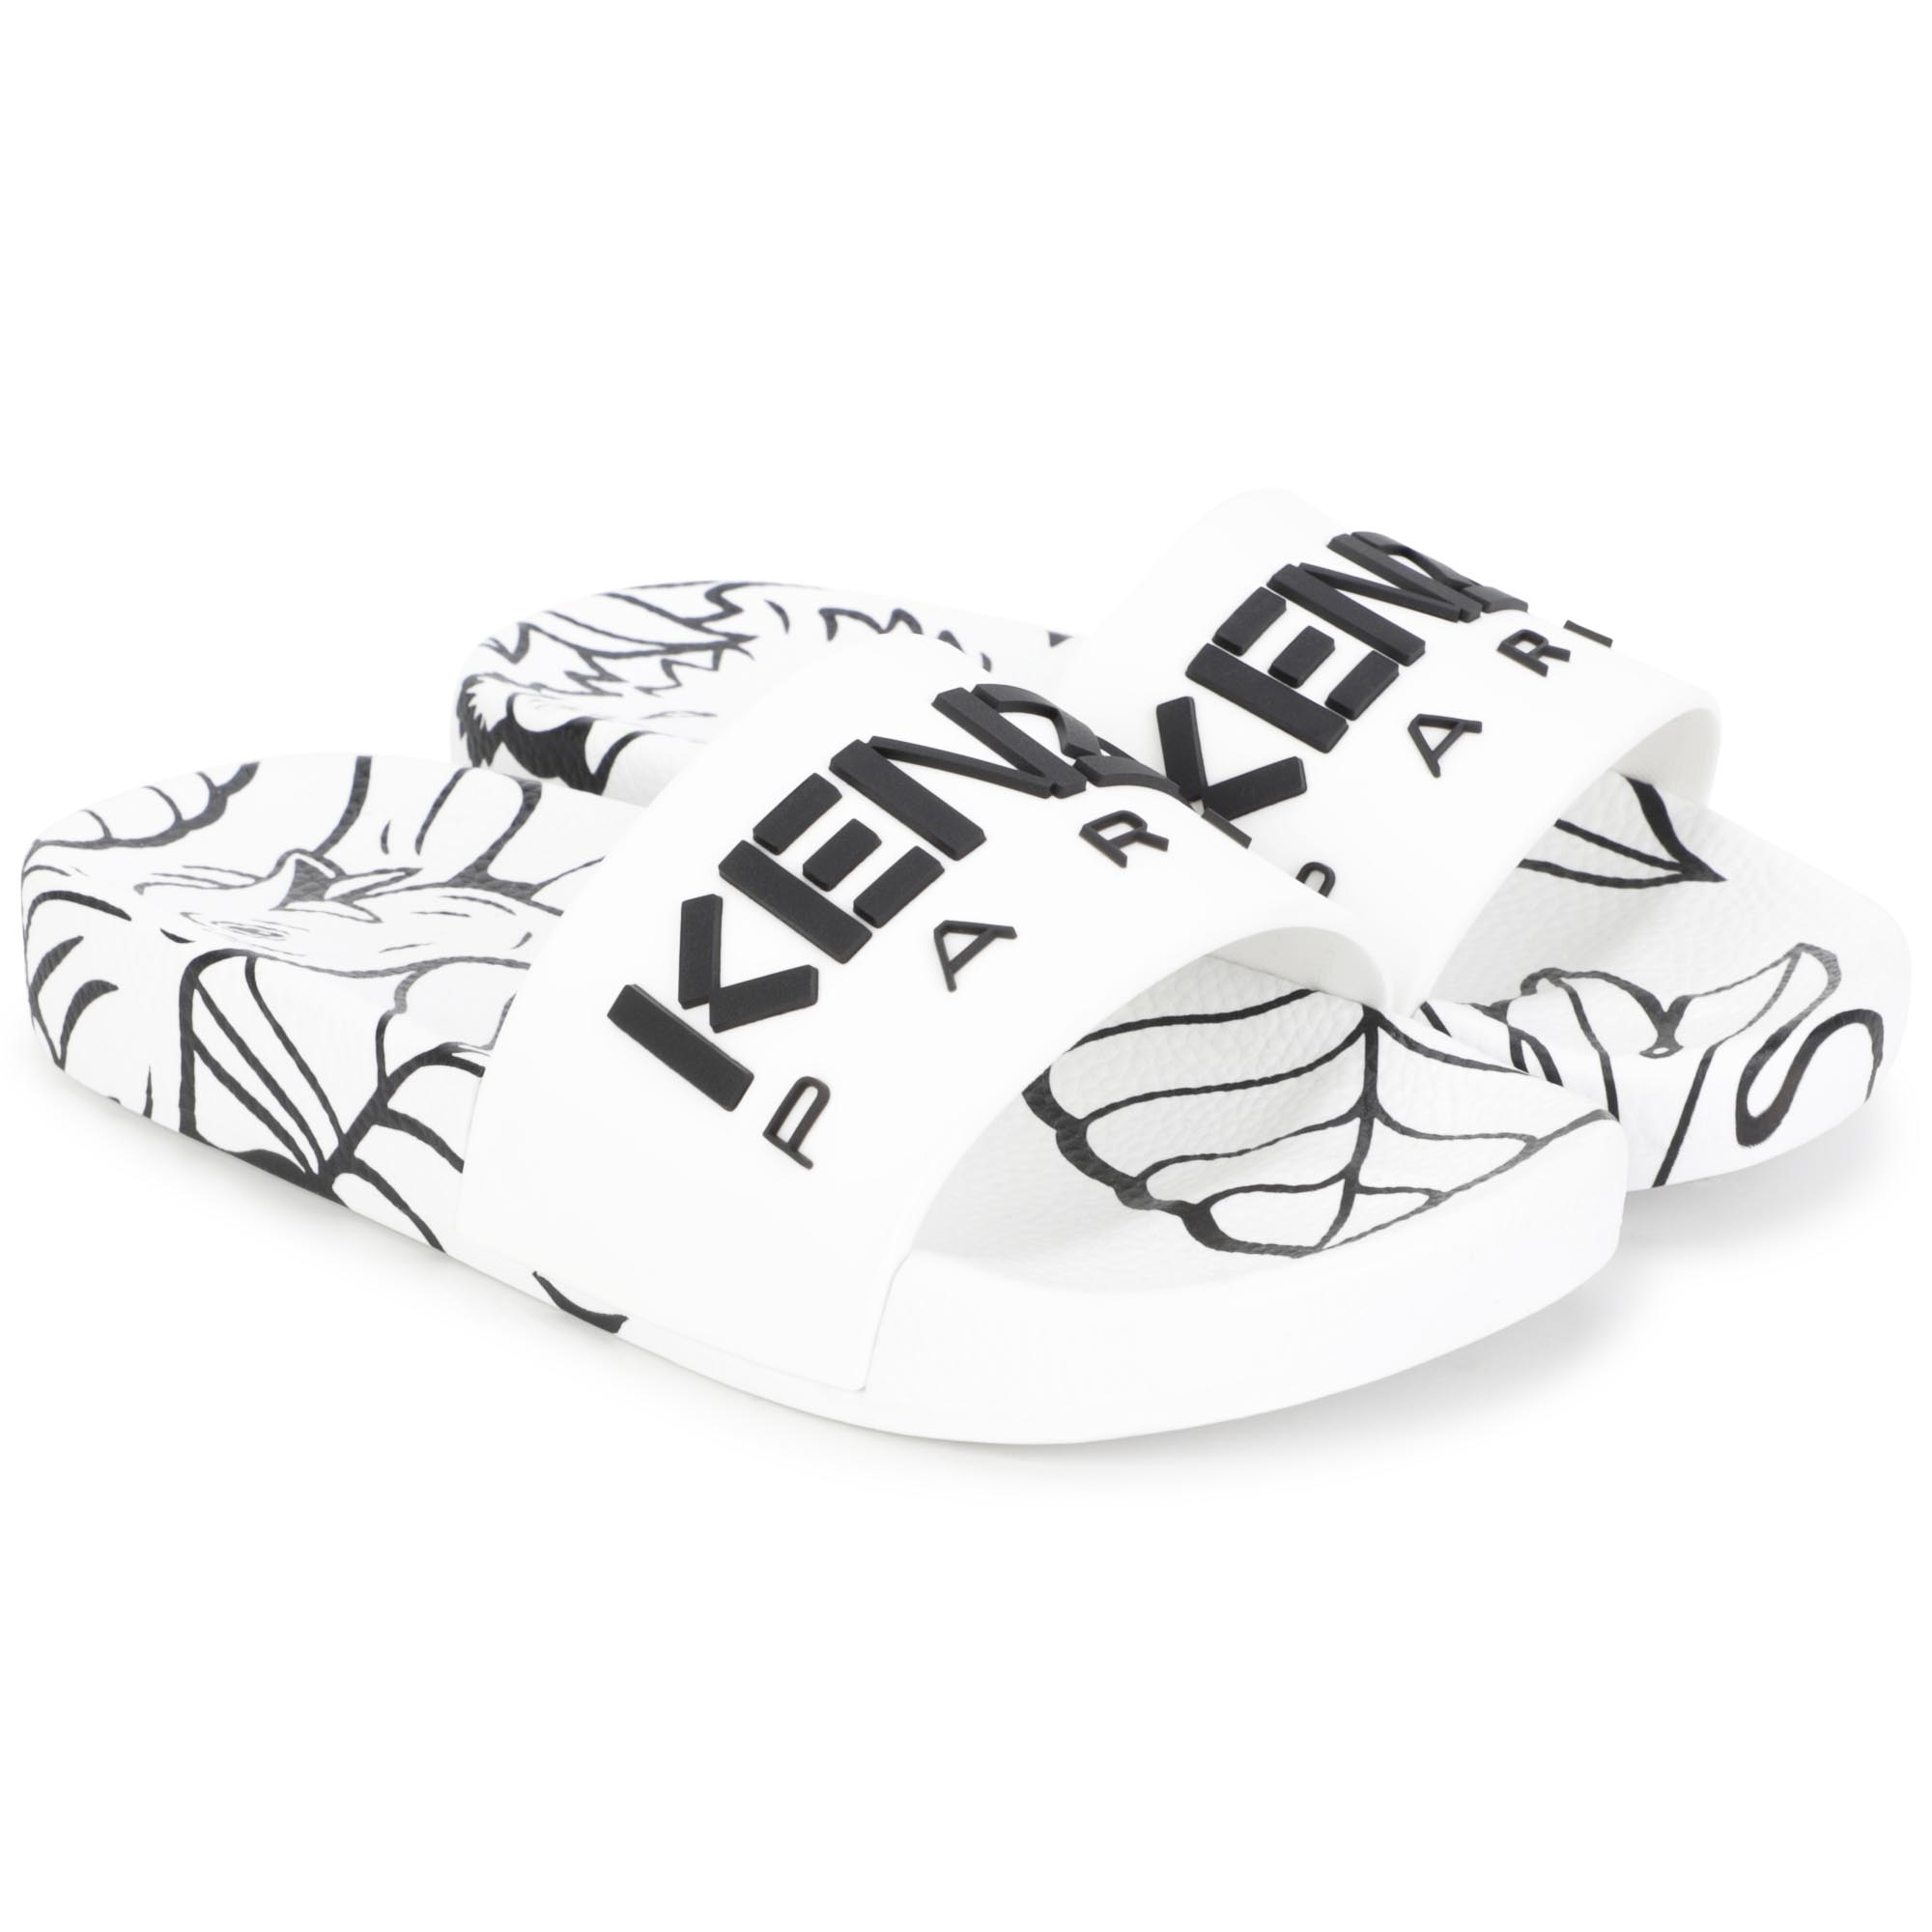 Flip-flops with rubber sole KENZO KIDS for UNISEX